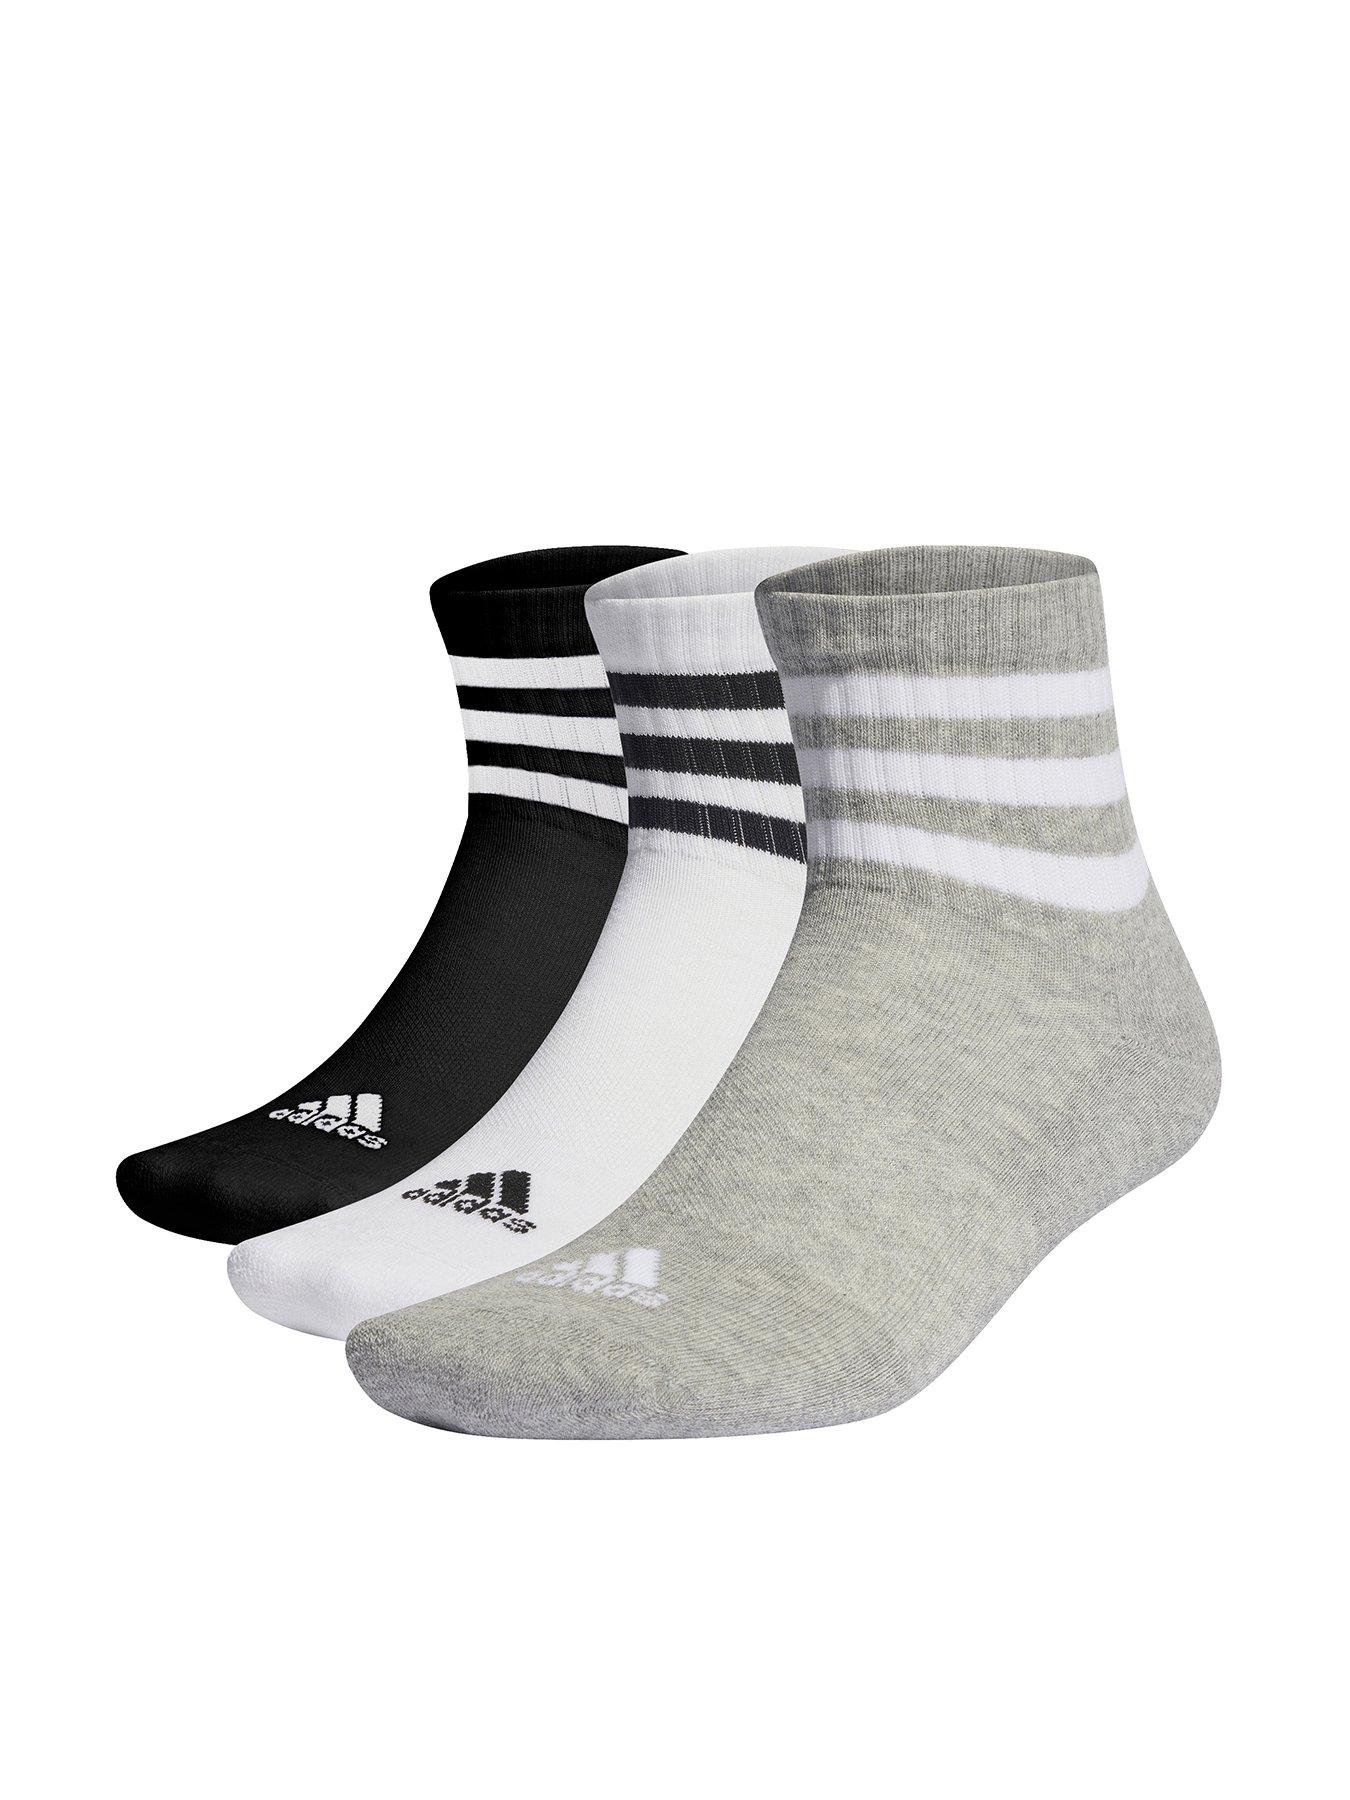 adidas Cushioned 2.0 Socks (For Men and Women) - Save 27%